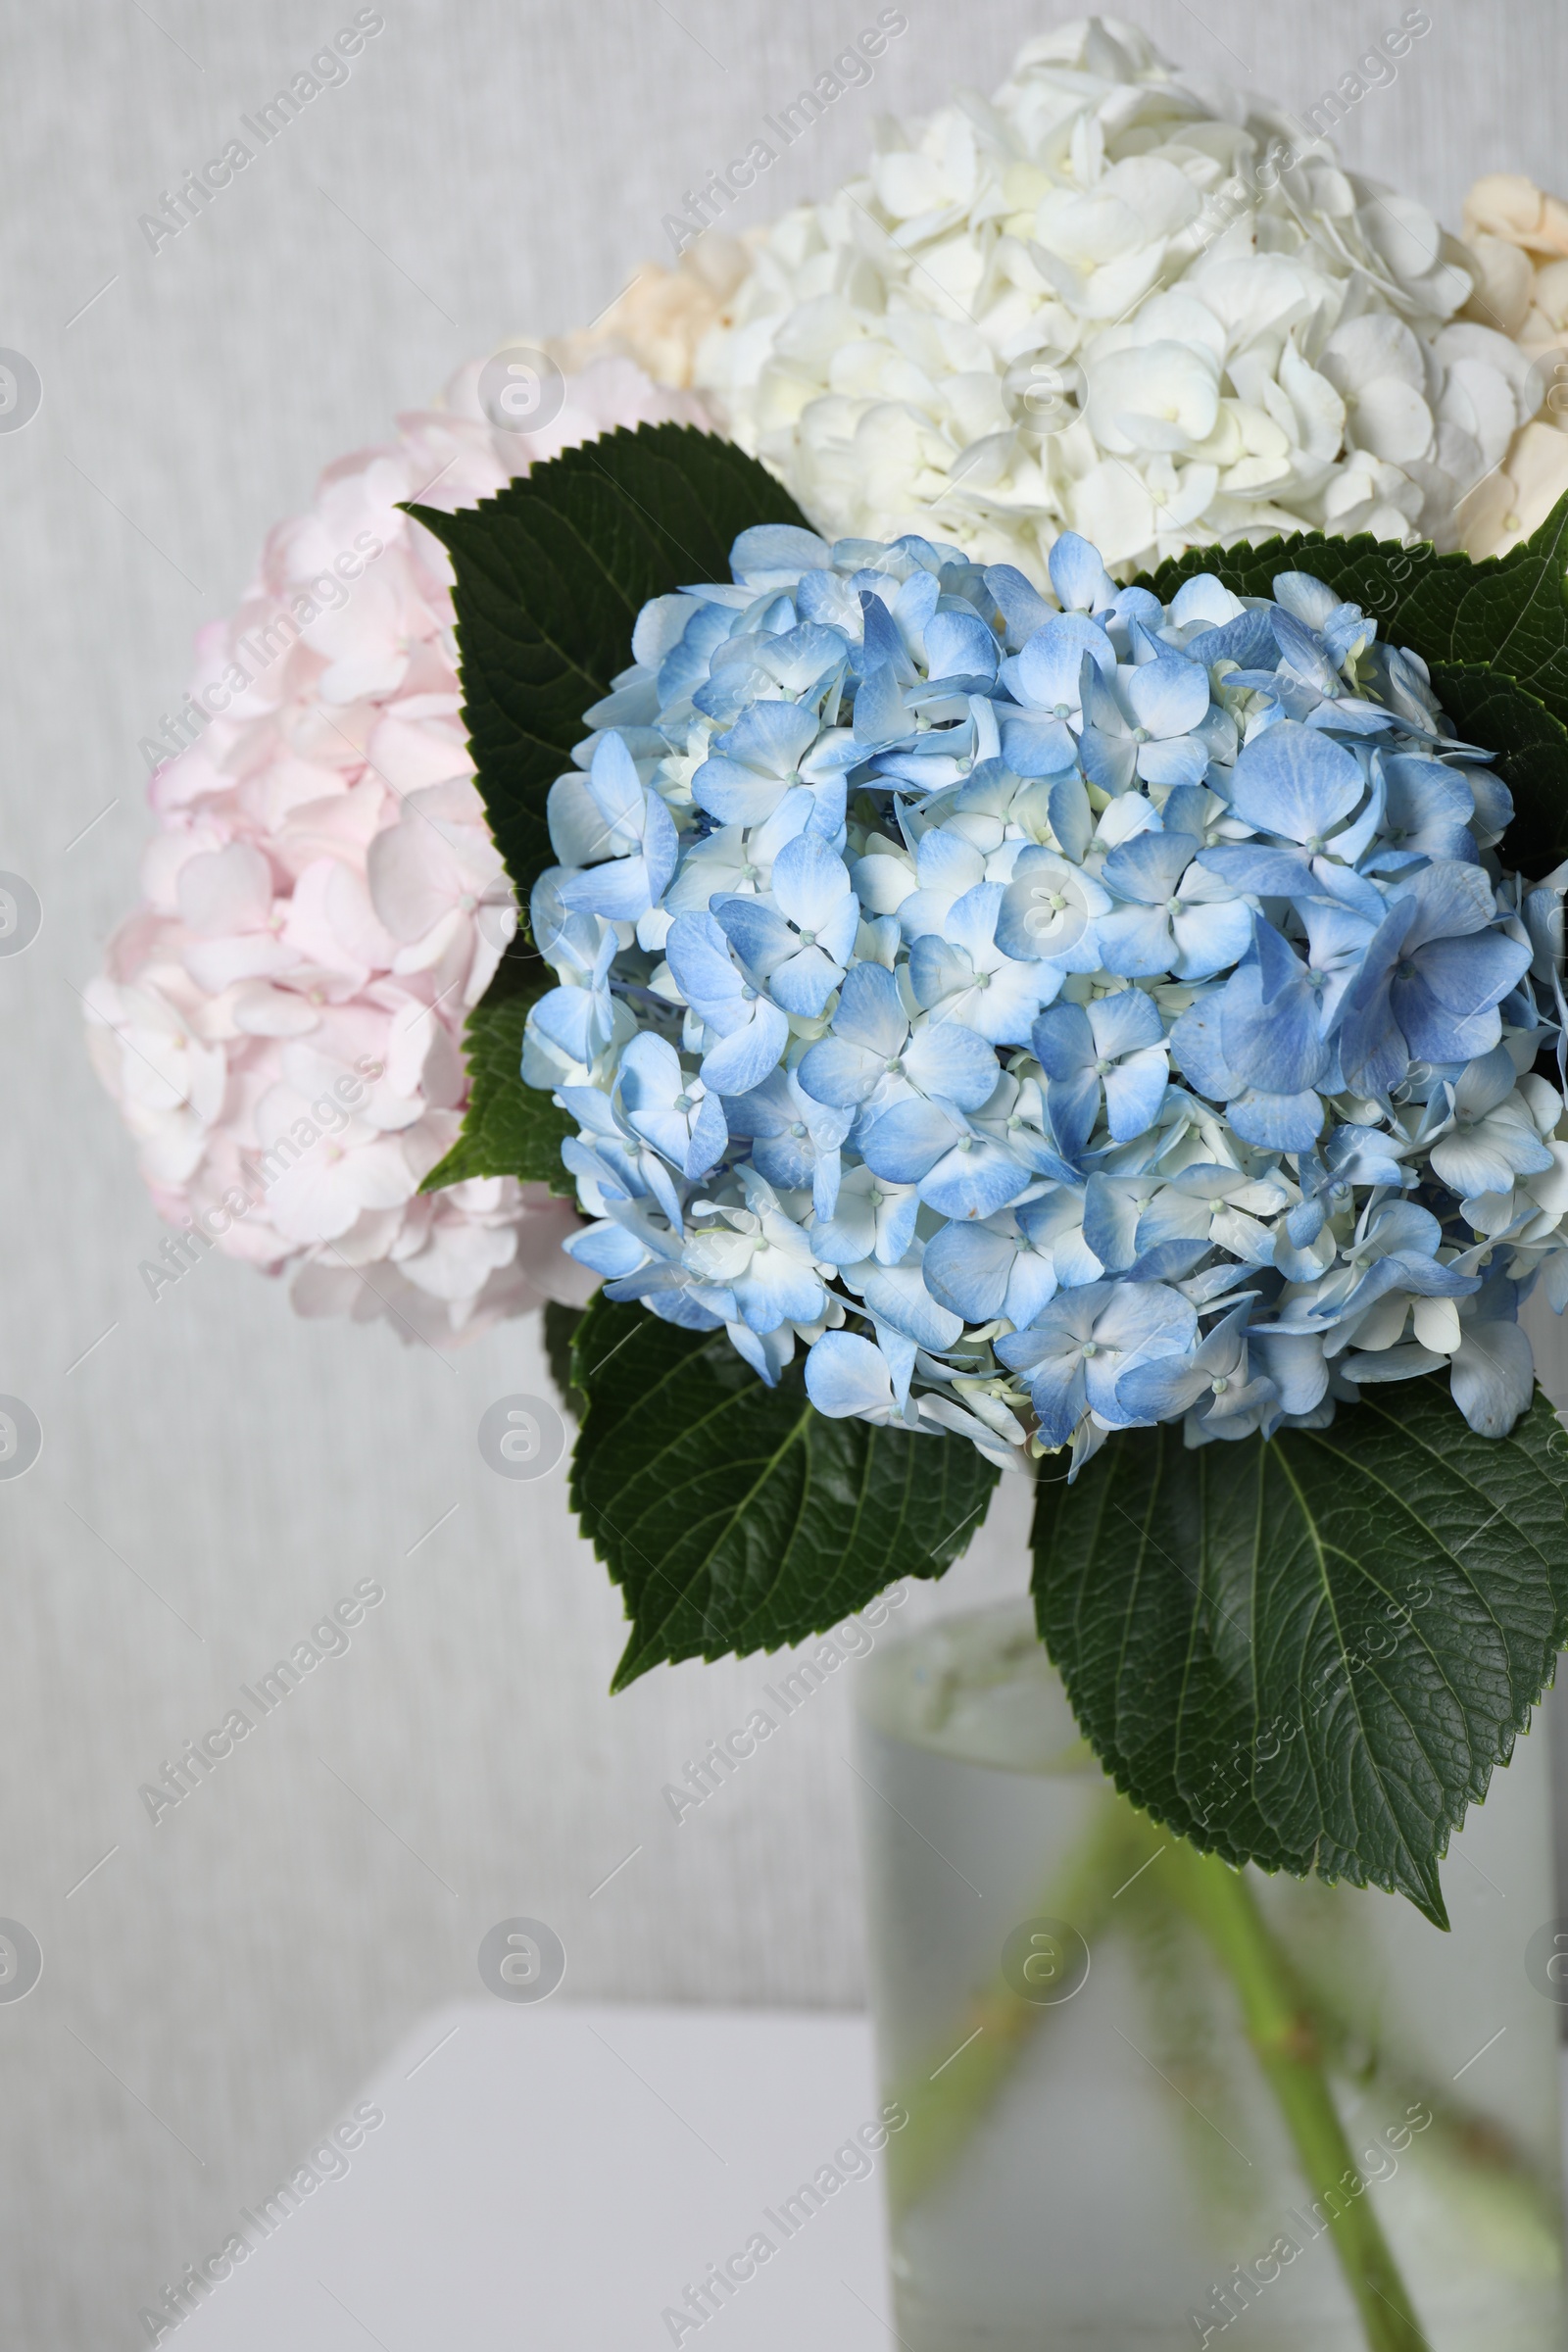 Photo of Beautiful hydrangea flowers in vase on white table against light gray wall